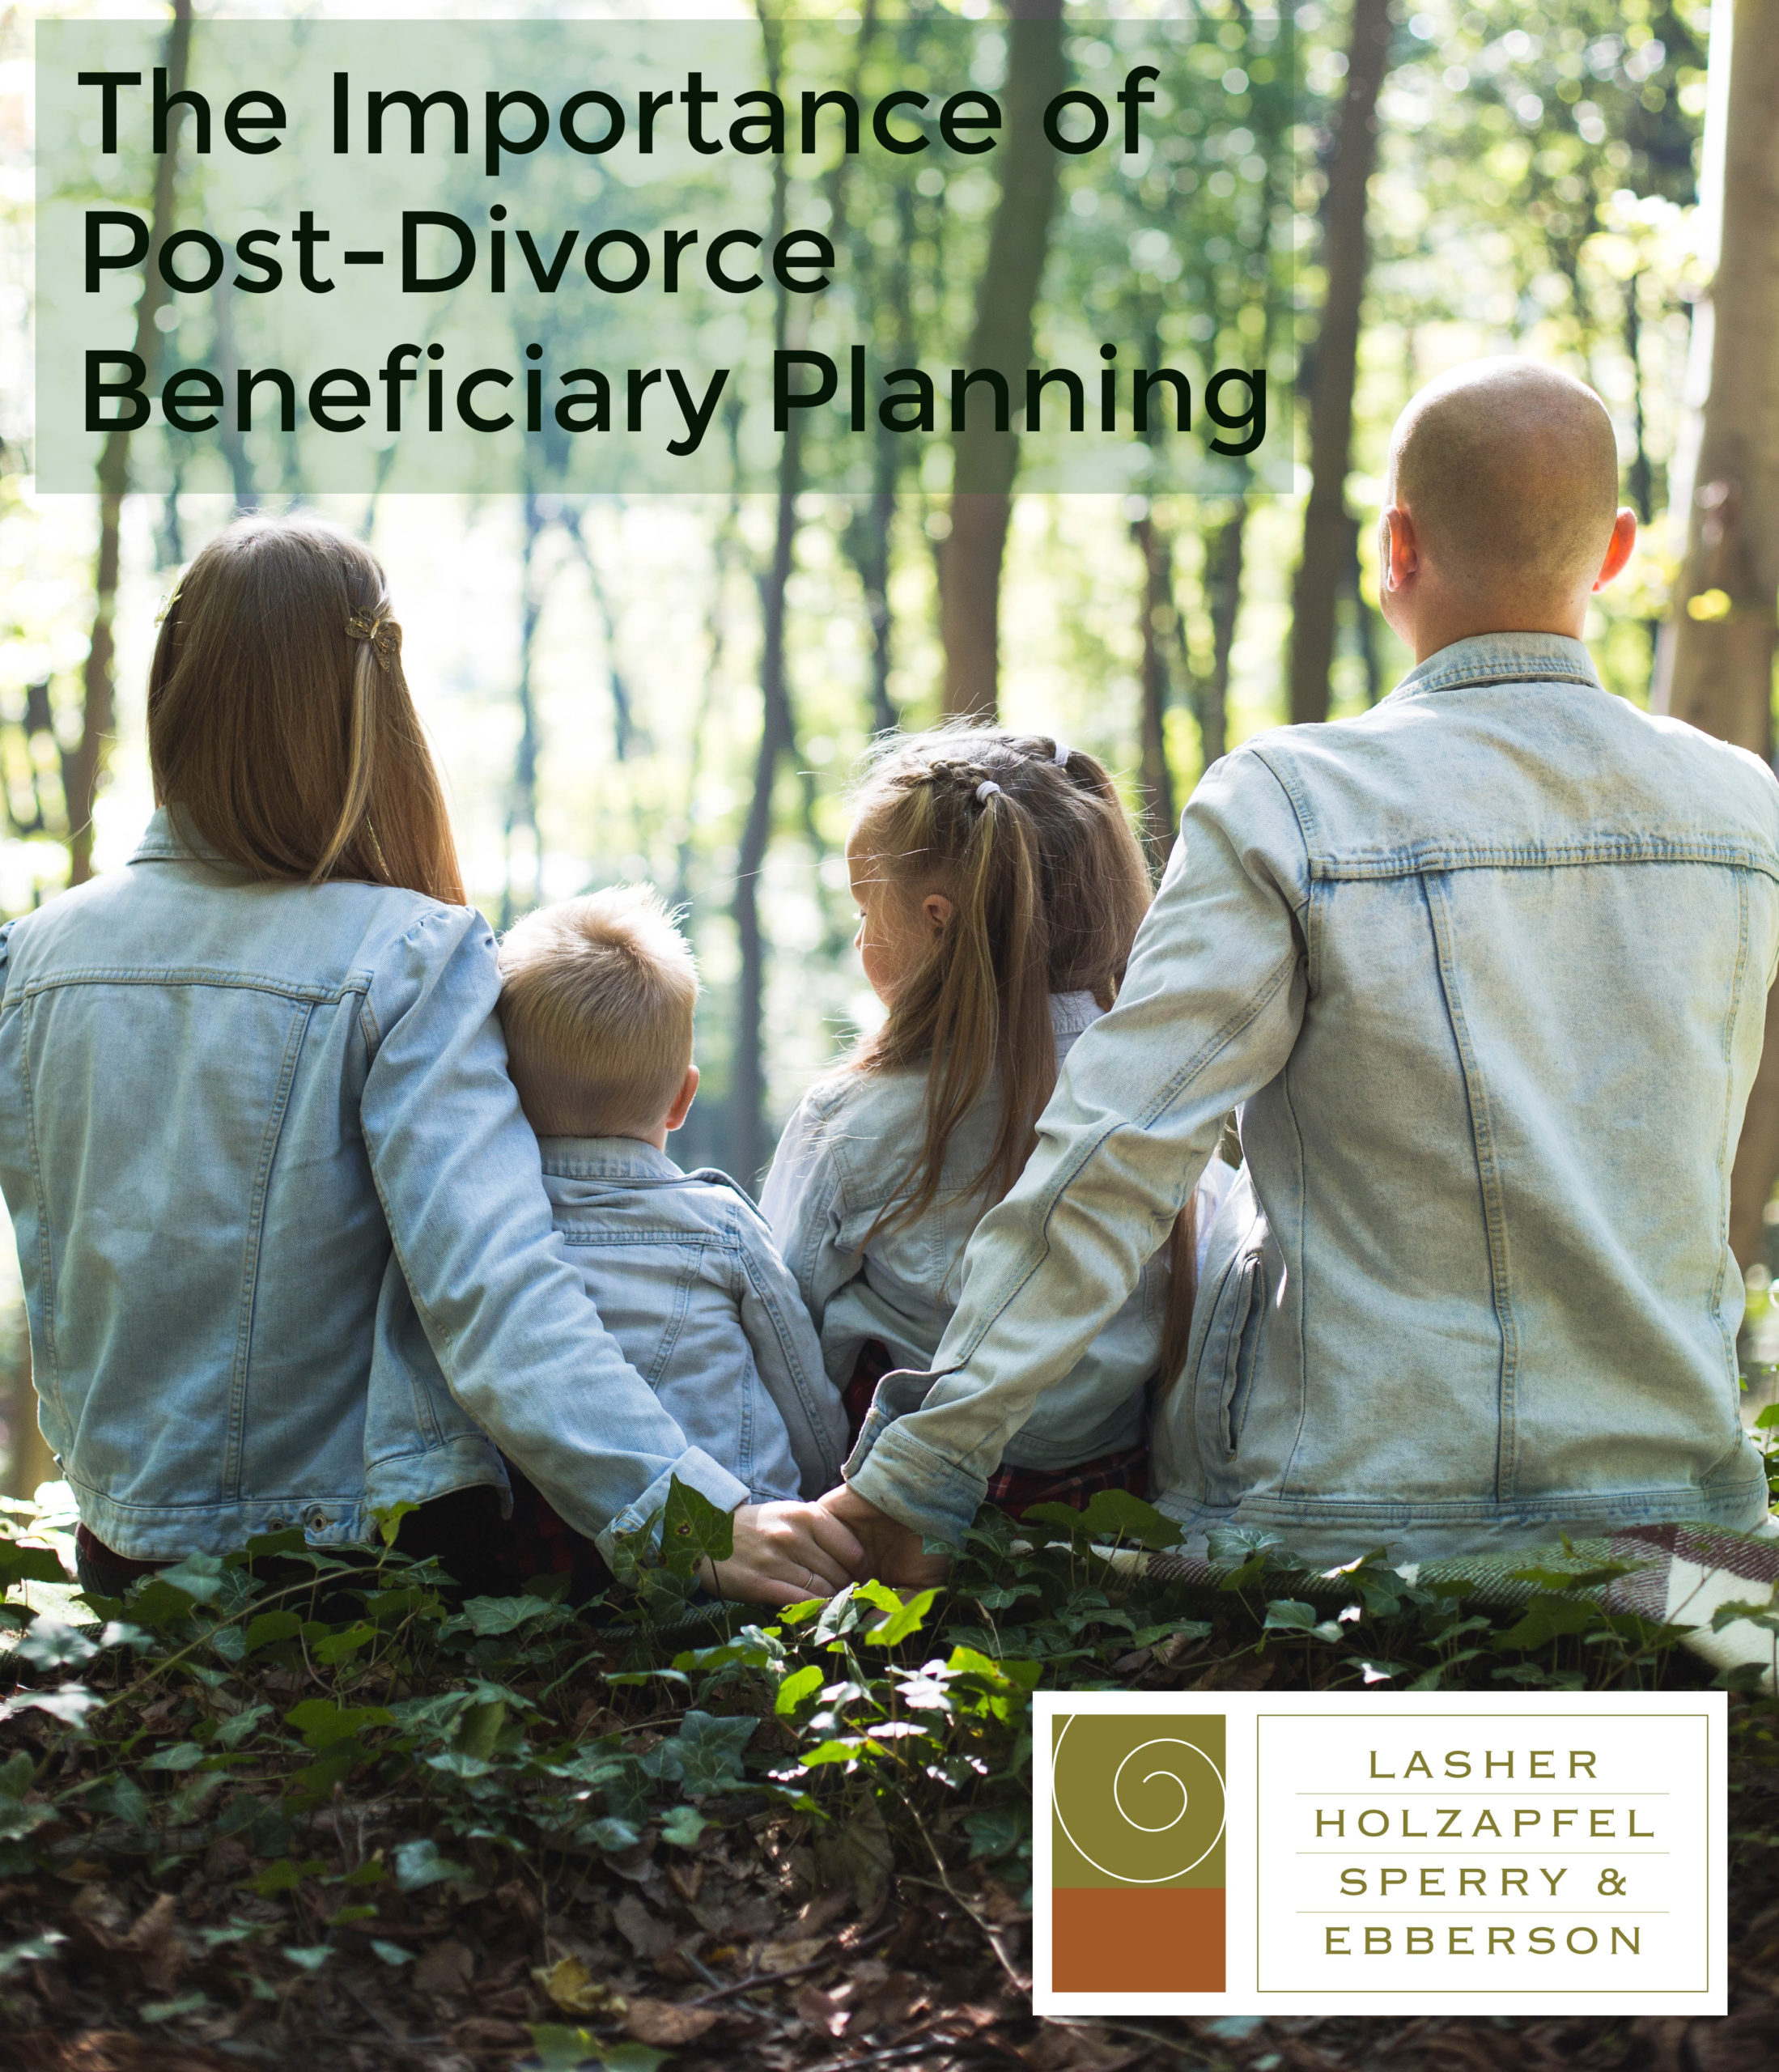 The Importance of Post-Divorce Beneficiary Planning